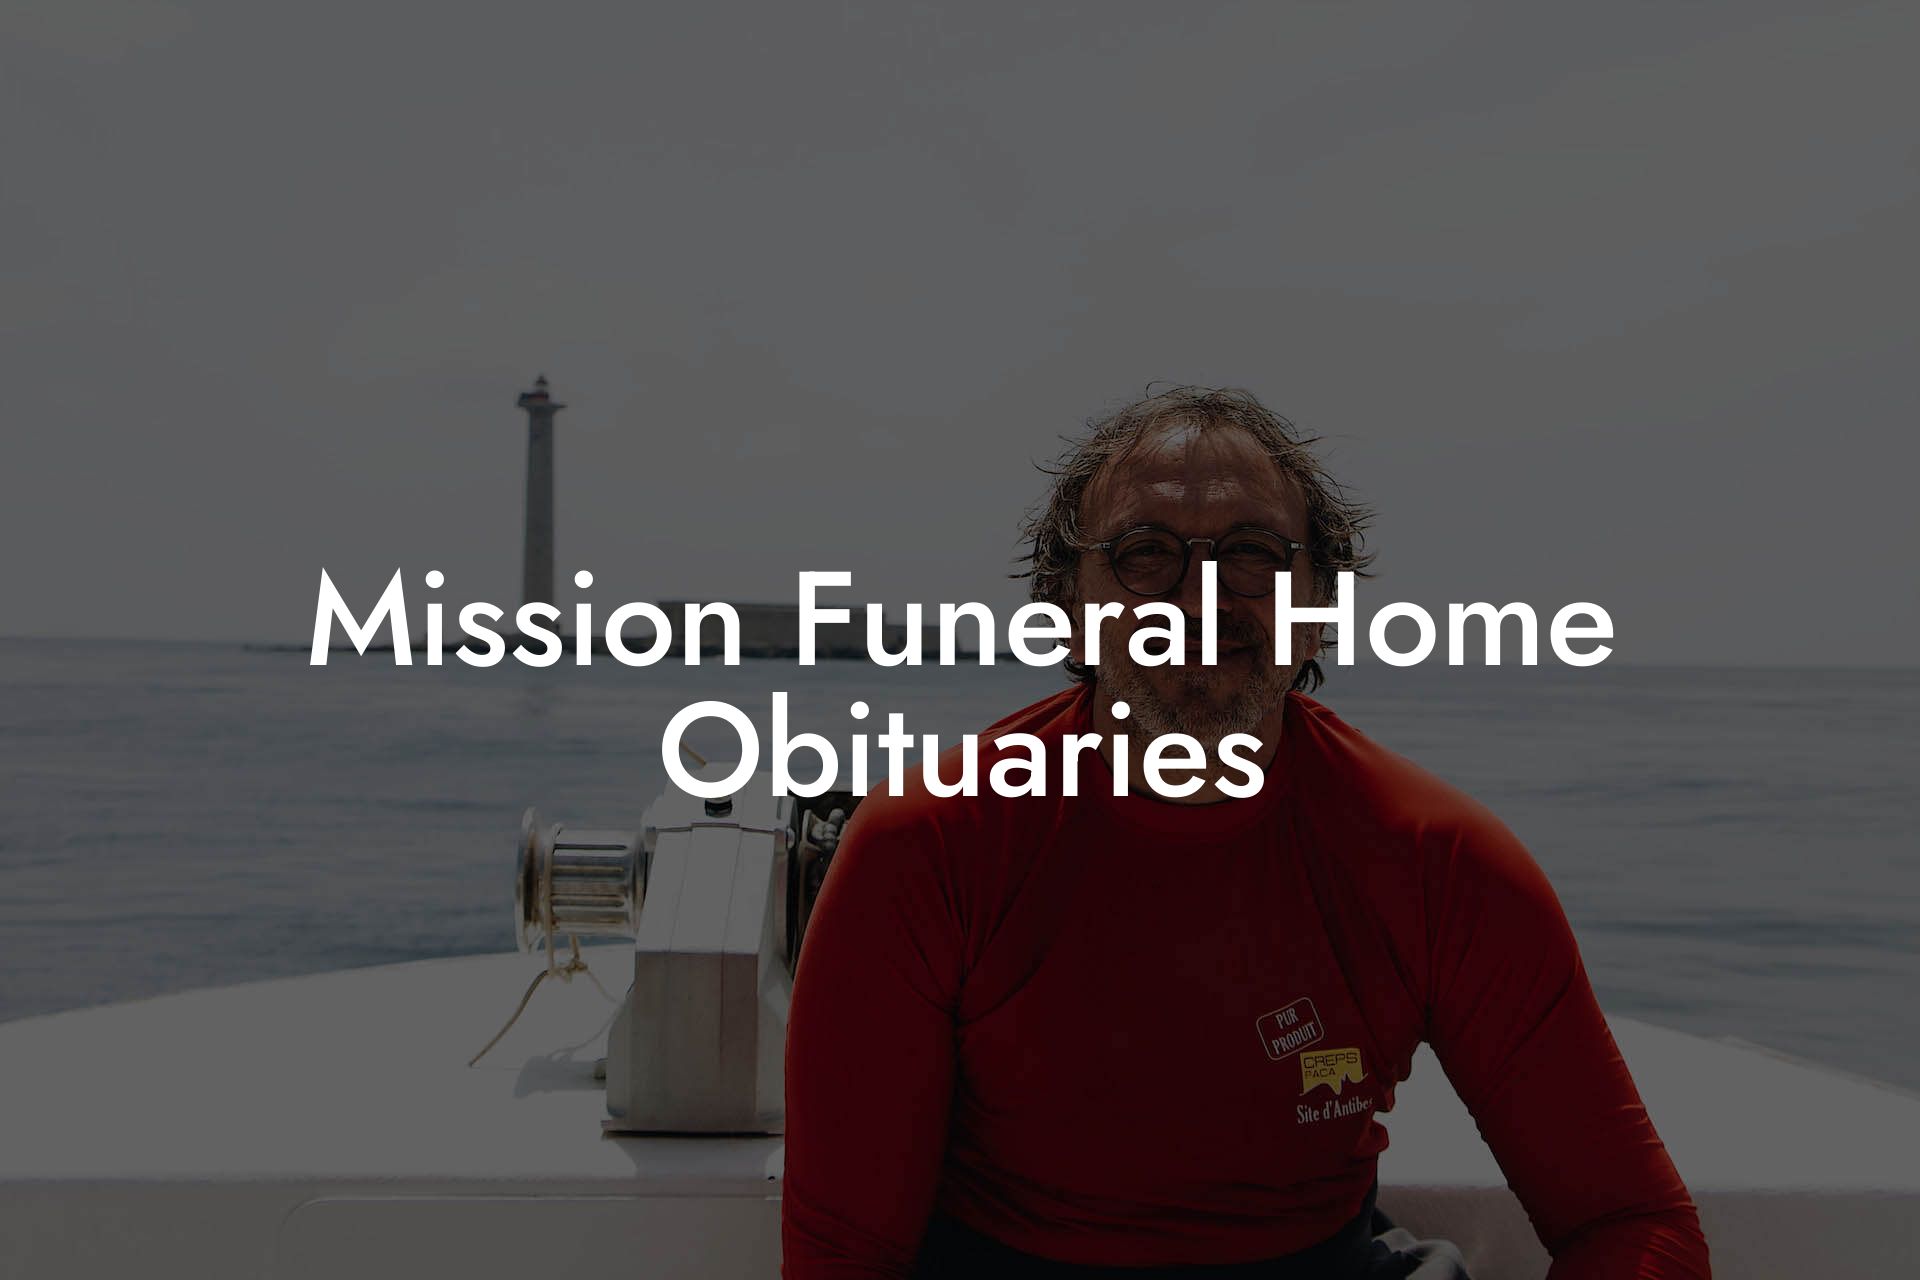 Mission Funeral Home Obituaries